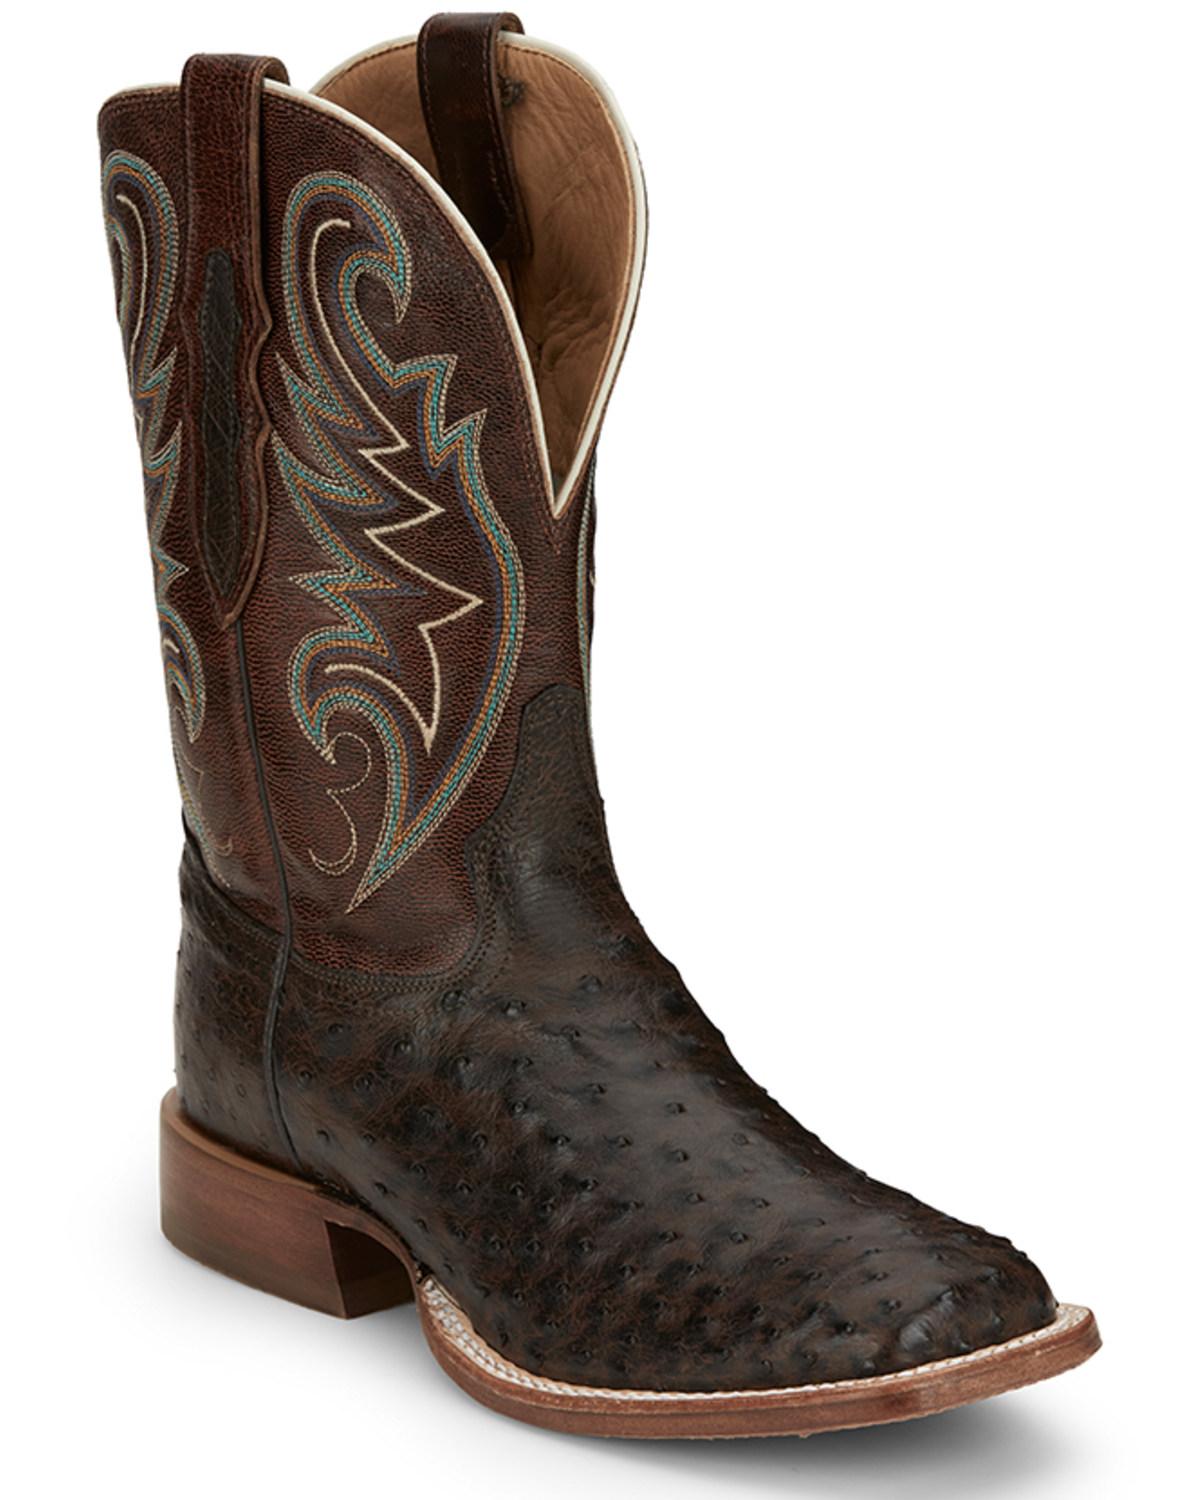 Tony Lama Men's Sienna Exotic Full Quill Ostrich Western Boots - Broad Square Toe